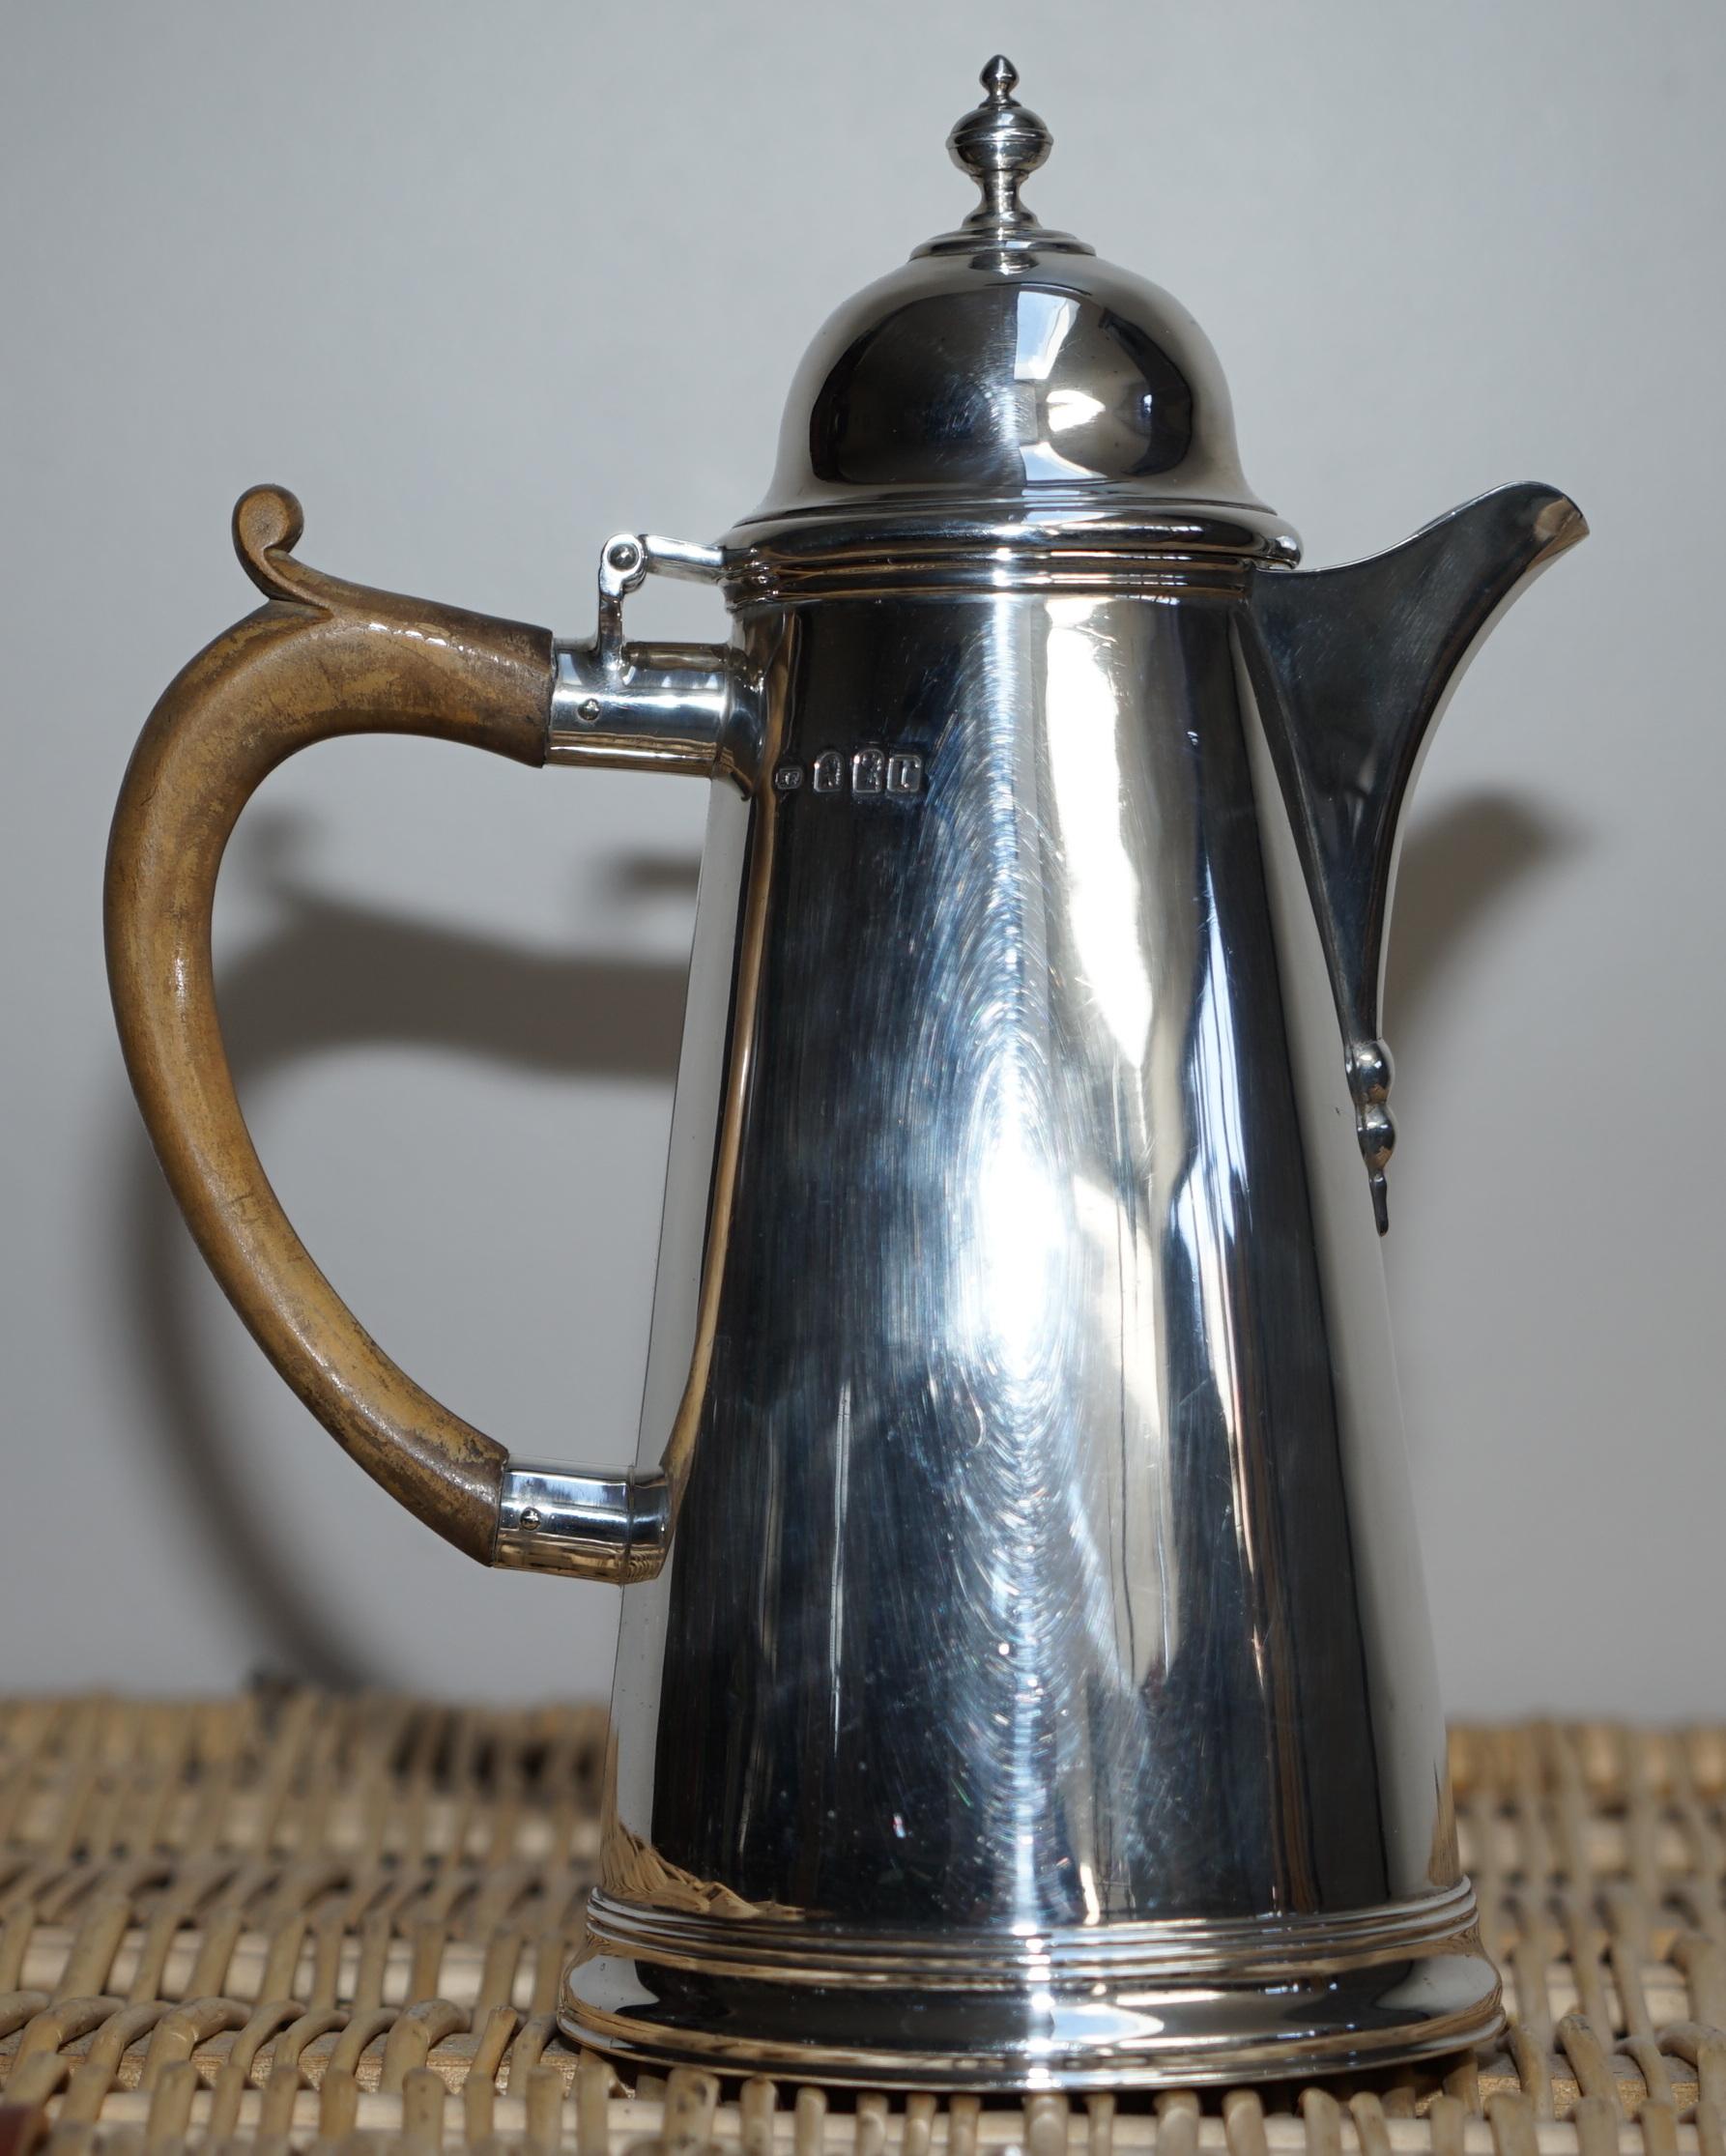 We are delighted to offer for sale this pair of original 1912 Britannia sterling silver Harry Freeman Café Au Lait coffee and milk jugs

A stunning and very well made pair, they are Britannia silver, sterling silver is 925/1000 parts silver,